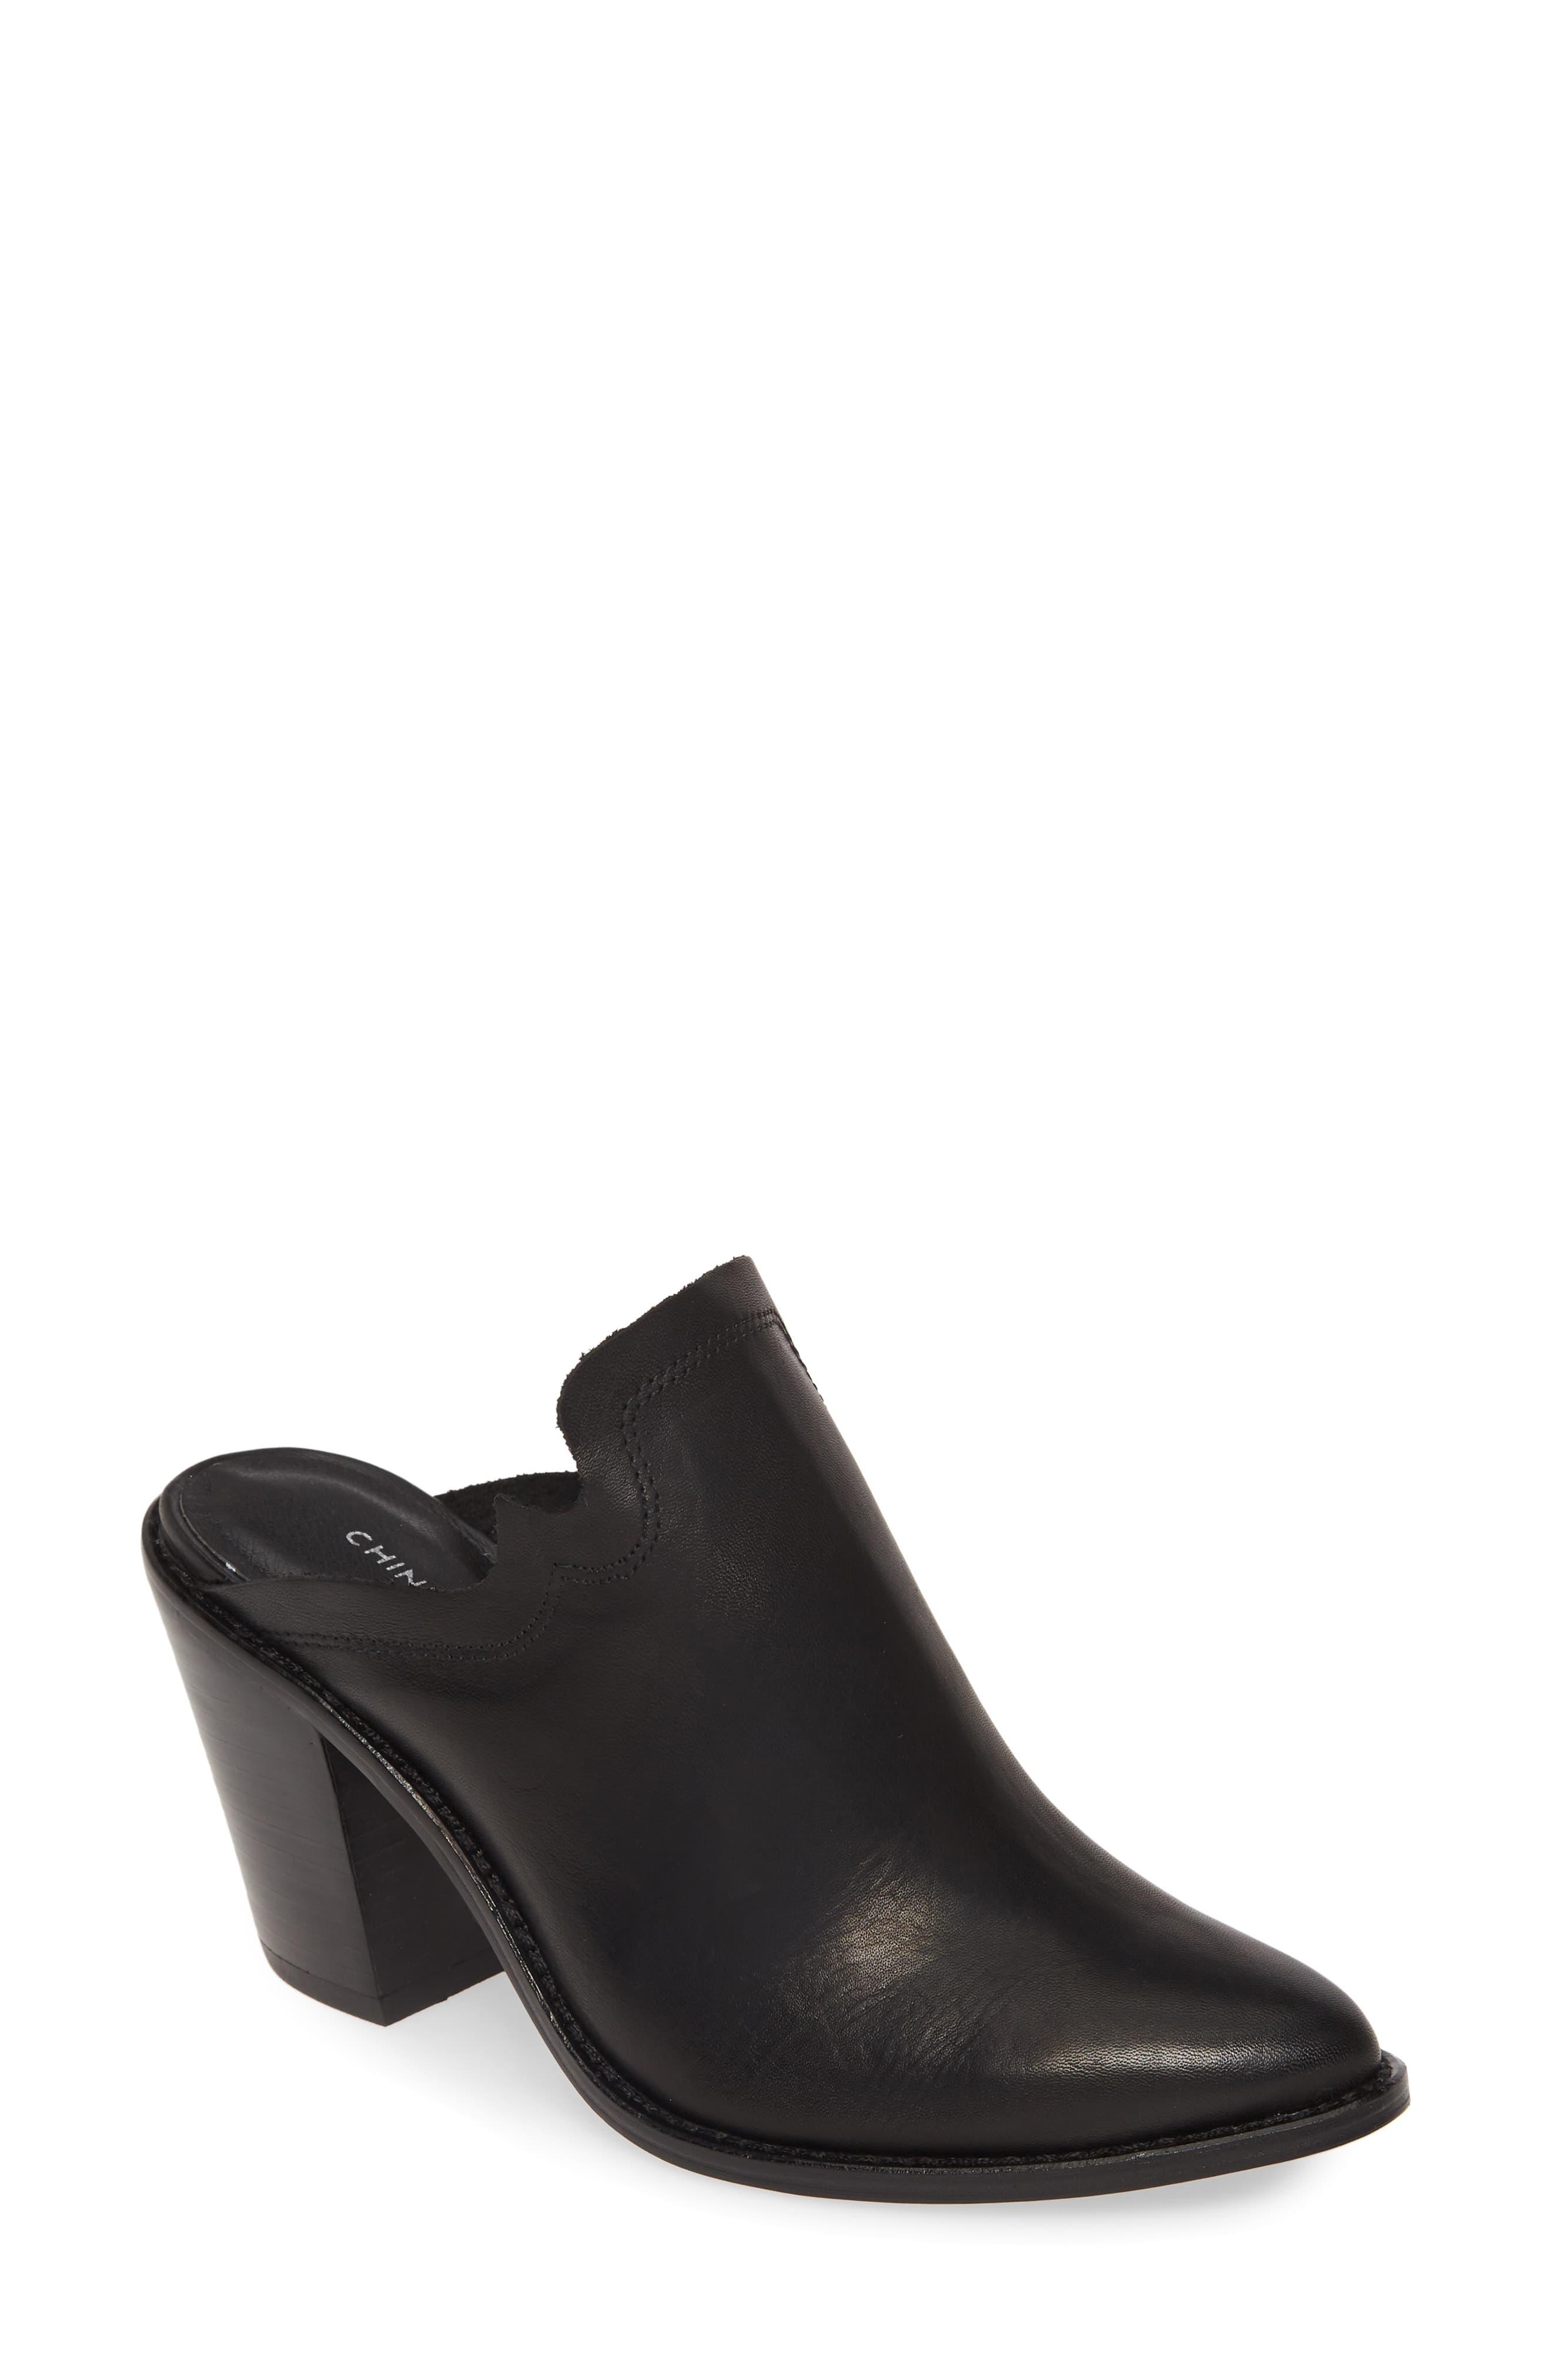 Chinese Laundry Songstress Mule in Black Leather (Black) - Lyst